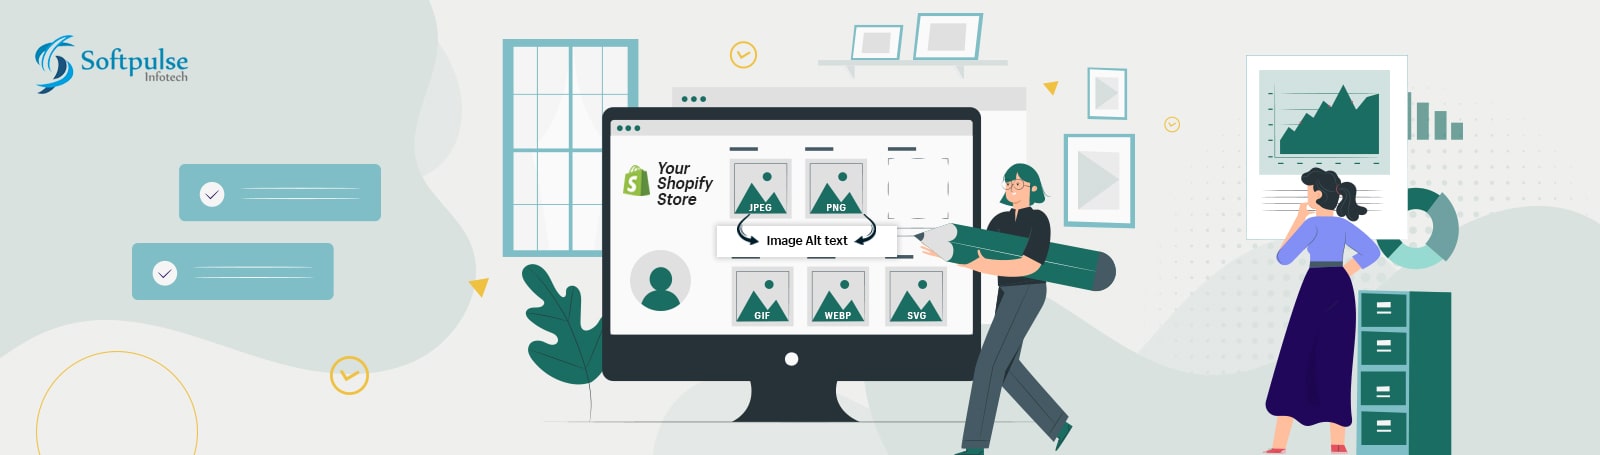 Image SEO For Shopify Store – Why Does Store Need Image ALT text?